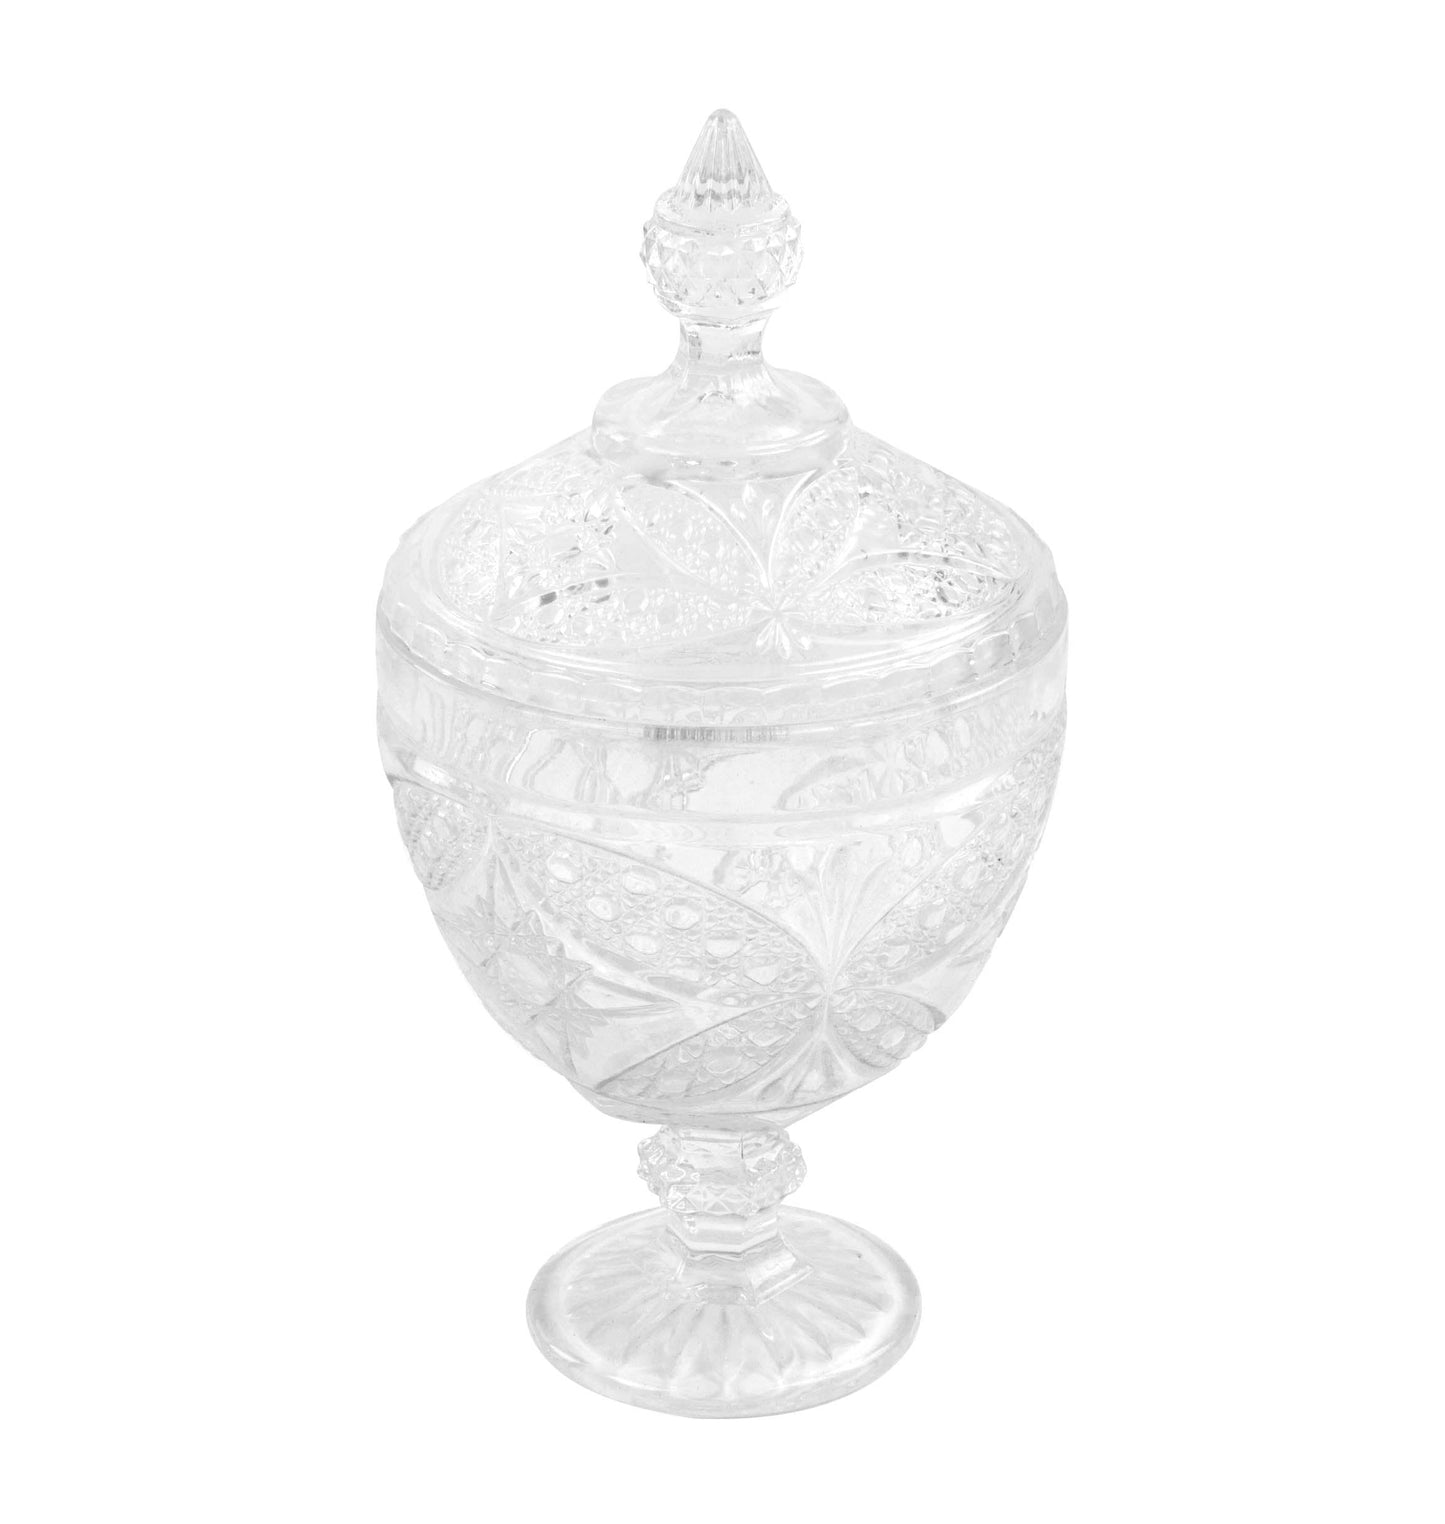 Glass Sugar Jar Candy Sweets Bowl with Lid 8849 (Parcel Rate)